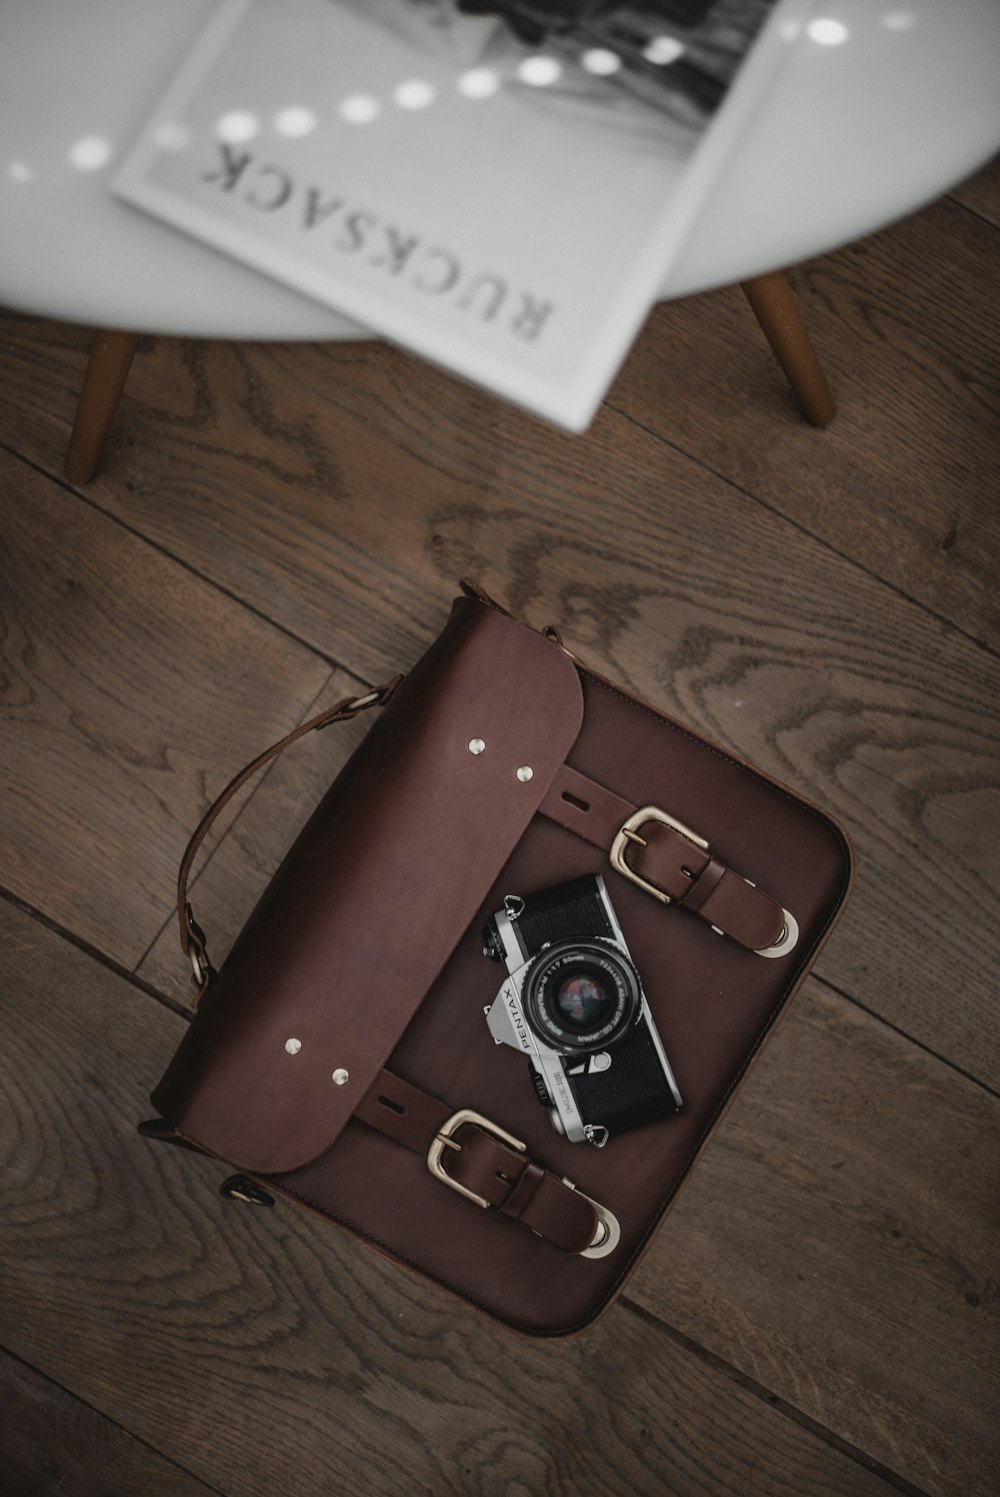 brown leather case on brown surface